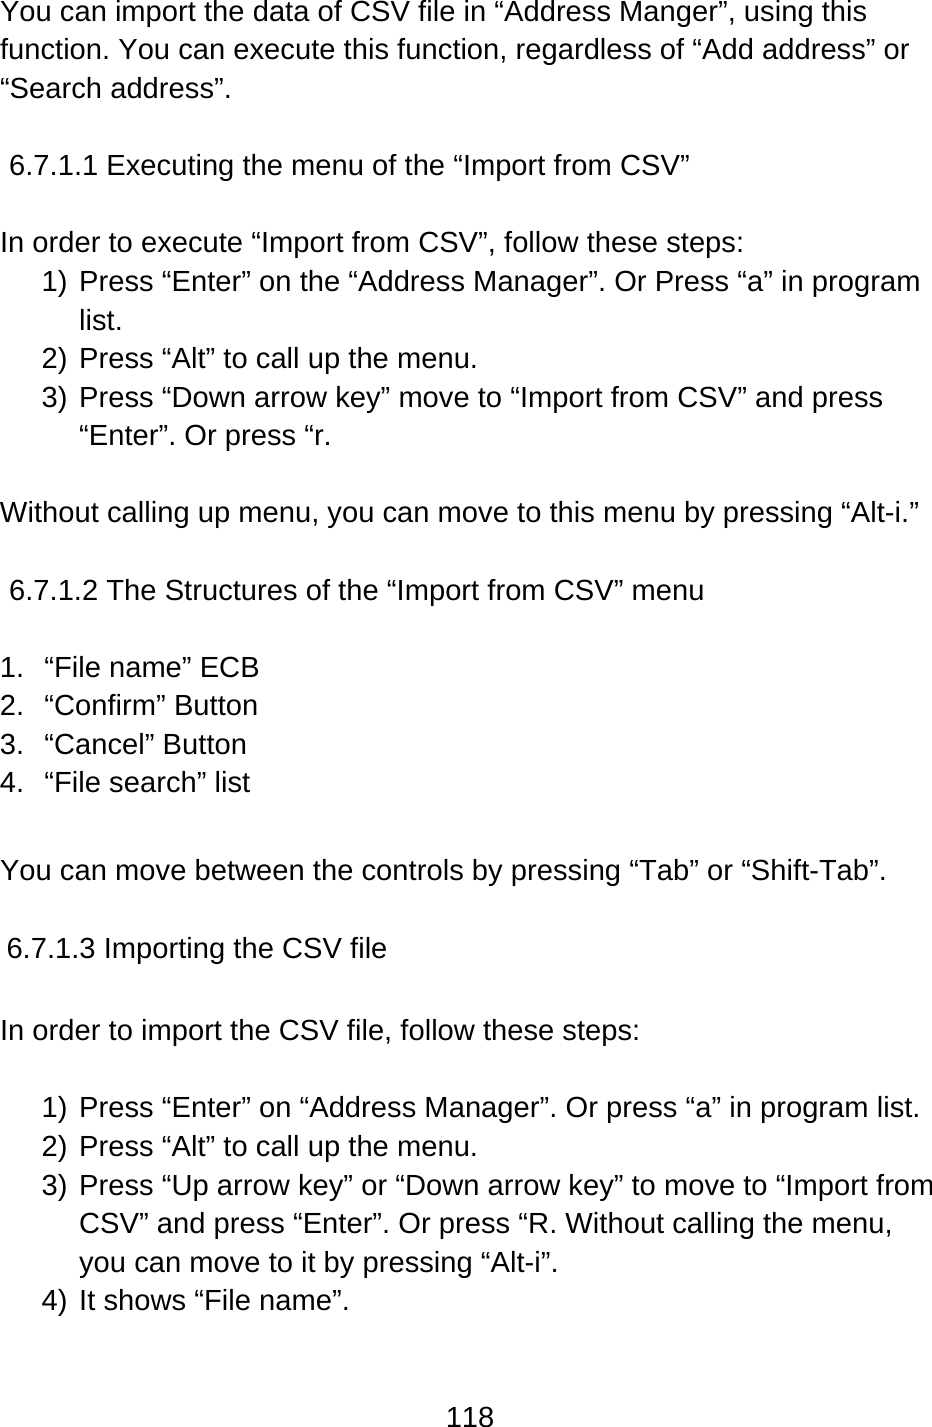 118  You can import the data of CSV file in “Address Manger”, using this function. You can execute this function, regardless of “Add address” or “Search address”.  6.7.1.1 Executing the menu of the “Import from CSV”  In order to execute “Import from CSV”, follow these steps: 1) Press “Enter” on the “Address Manager”. Or Press “a” in program list. 2) Press “Alt” to call up the menu. 3) Press “Down arrow key” move to “Import from CSV” and press “Enter”. Or press “r.  Without calling up menu, you can move to this menu by pressing “Alt-i.”  6.7.1.2 The Structures of the “Import from CSV” menu  1.  “File name” ECB 2. “Confirm” Button 3. “Cancel” Button 4.  “File search” list  You can move between the controls by pressing “Tab” or “Shift-Tab”.  6.7.1.3 Importing the CSV file  In order to import the CSV file, follow these steps:  1) Press “Enter” on “Address Manager”. Or press “a” in program list. 2) Press “Alt” to call up the menu. 3) Press “Up arrow key” or “Down arrow key” to move to “Import from CSV” and press “Enter”. Or press “R. Without calling the menu, you can move to it by pressing “Alt-i”. 4) It shows “File name”. 